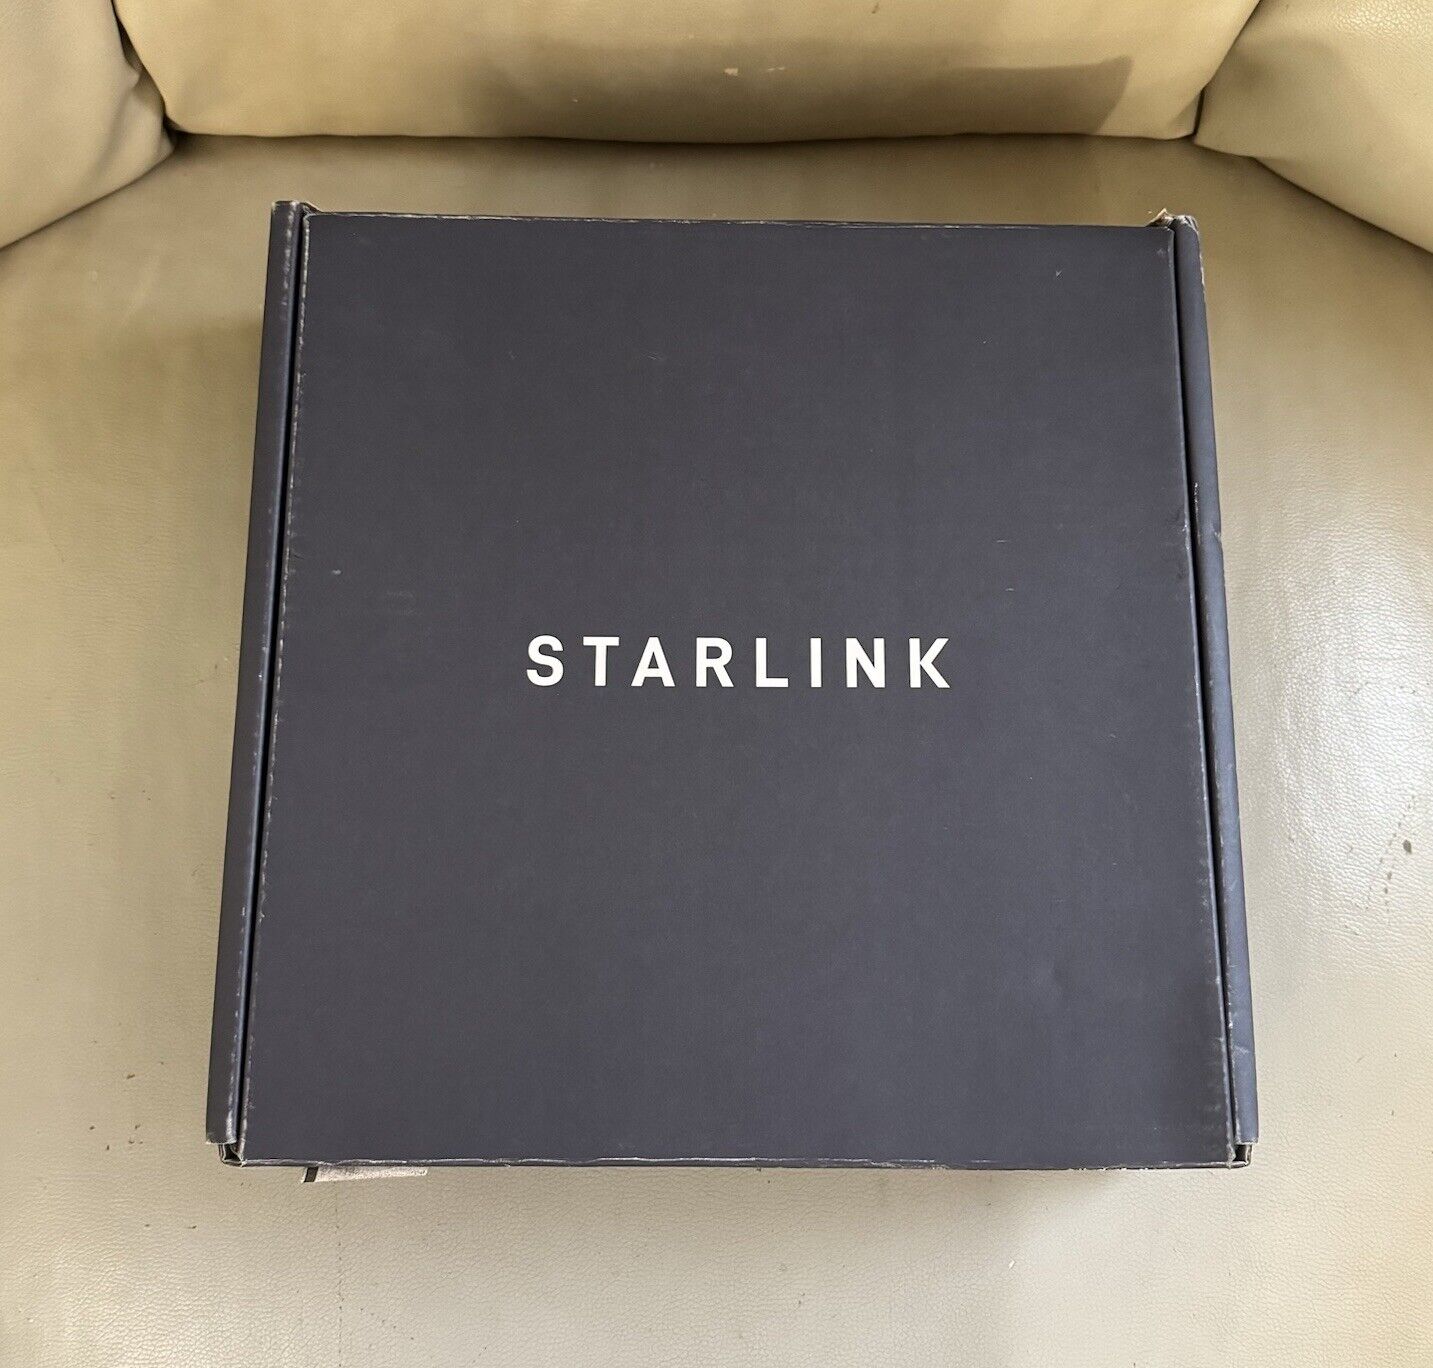 Starlink Standard OEM Gen3 45M / 150 Ft Cable. Free USPS optional Next Day Air